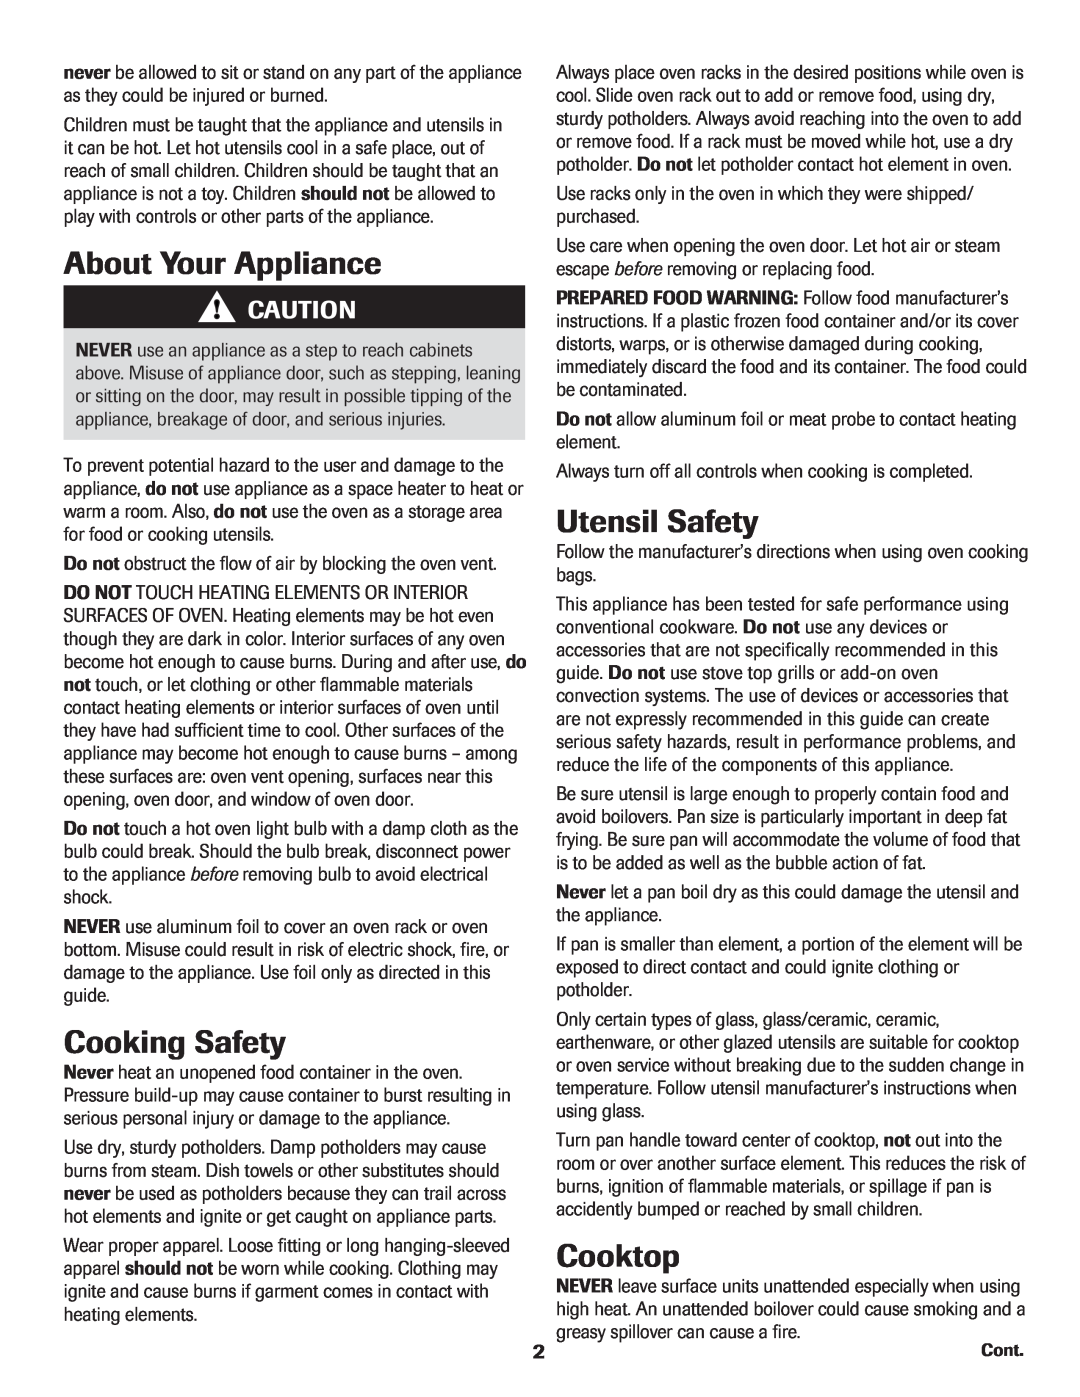 Amana Electric Smoothtop Range important safety instructions About Your Appliance, Cooking Safety, Utensil Safety, Cooktop 